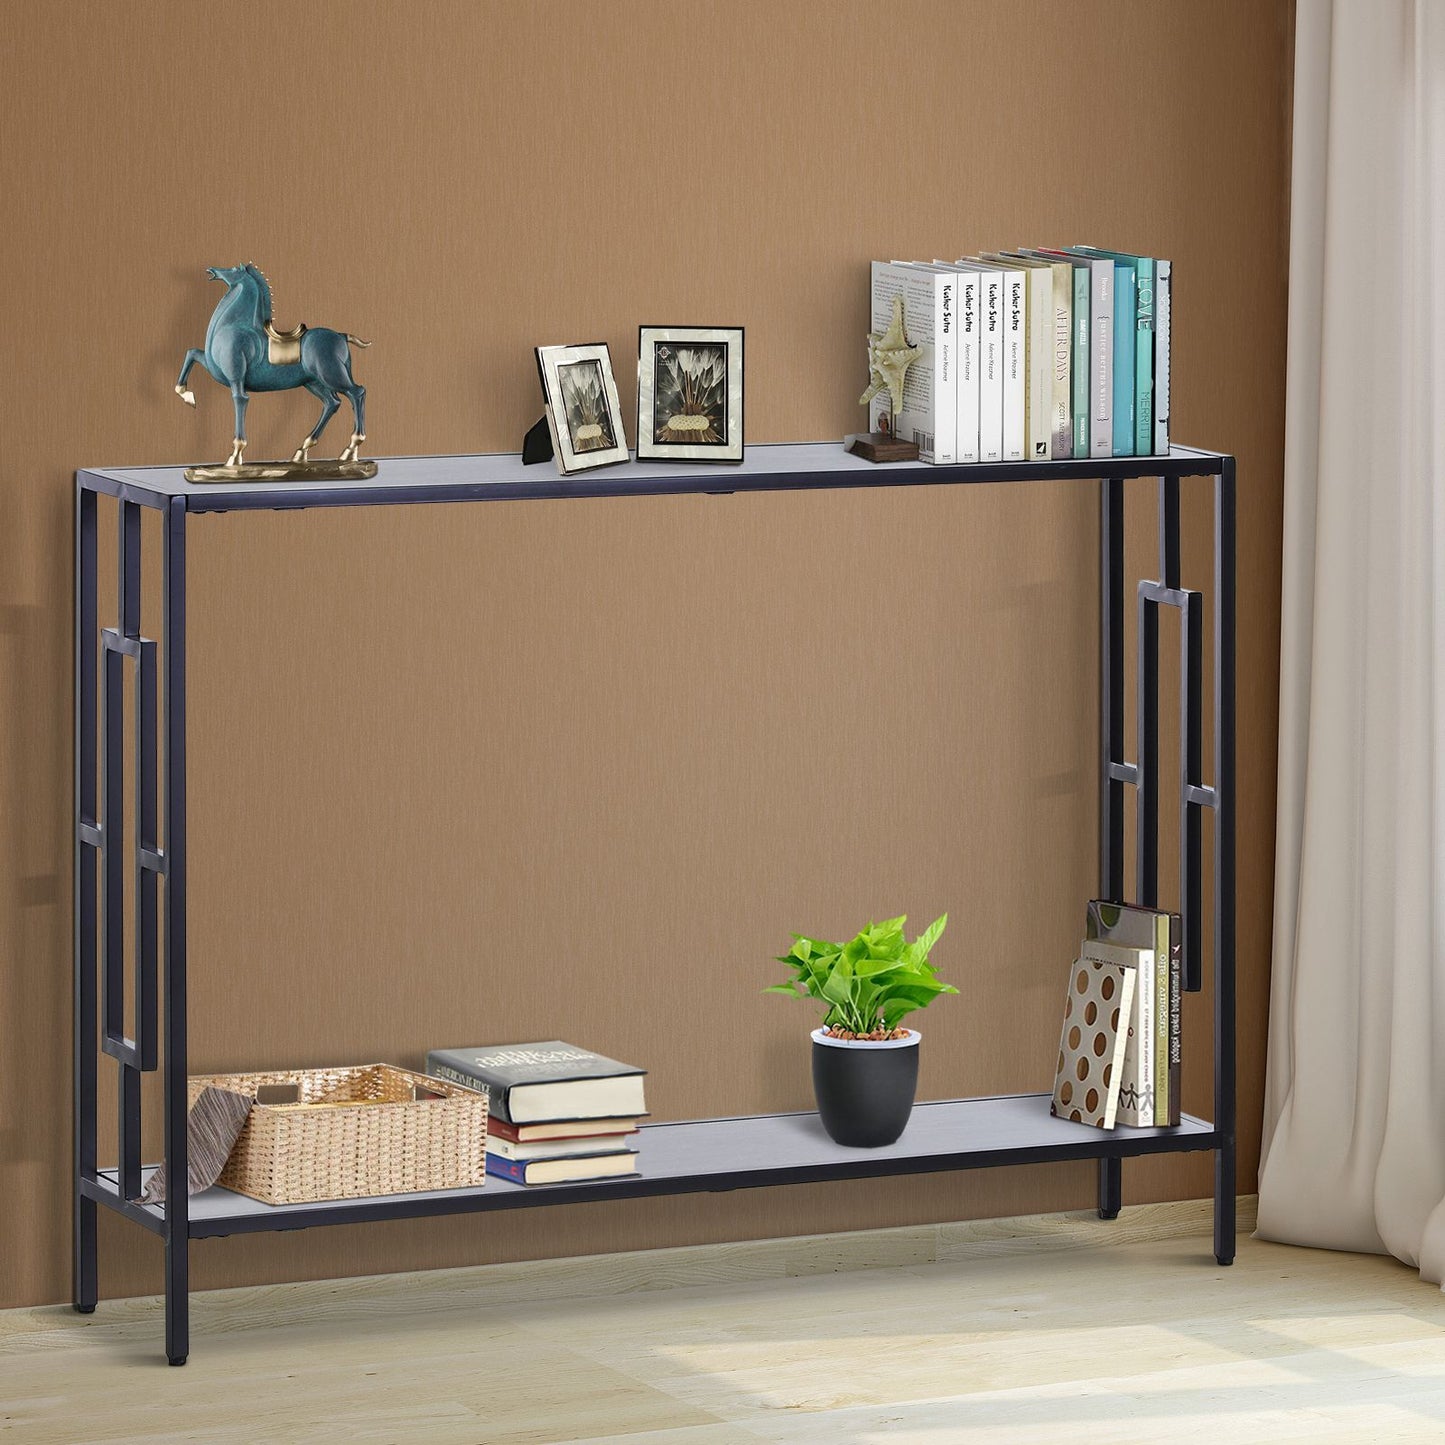 HOMCOM Console Table Narrow 2 Shelves MDF Steel Frame in Art Deco Square Style 76x106cm for Hallway Entrance